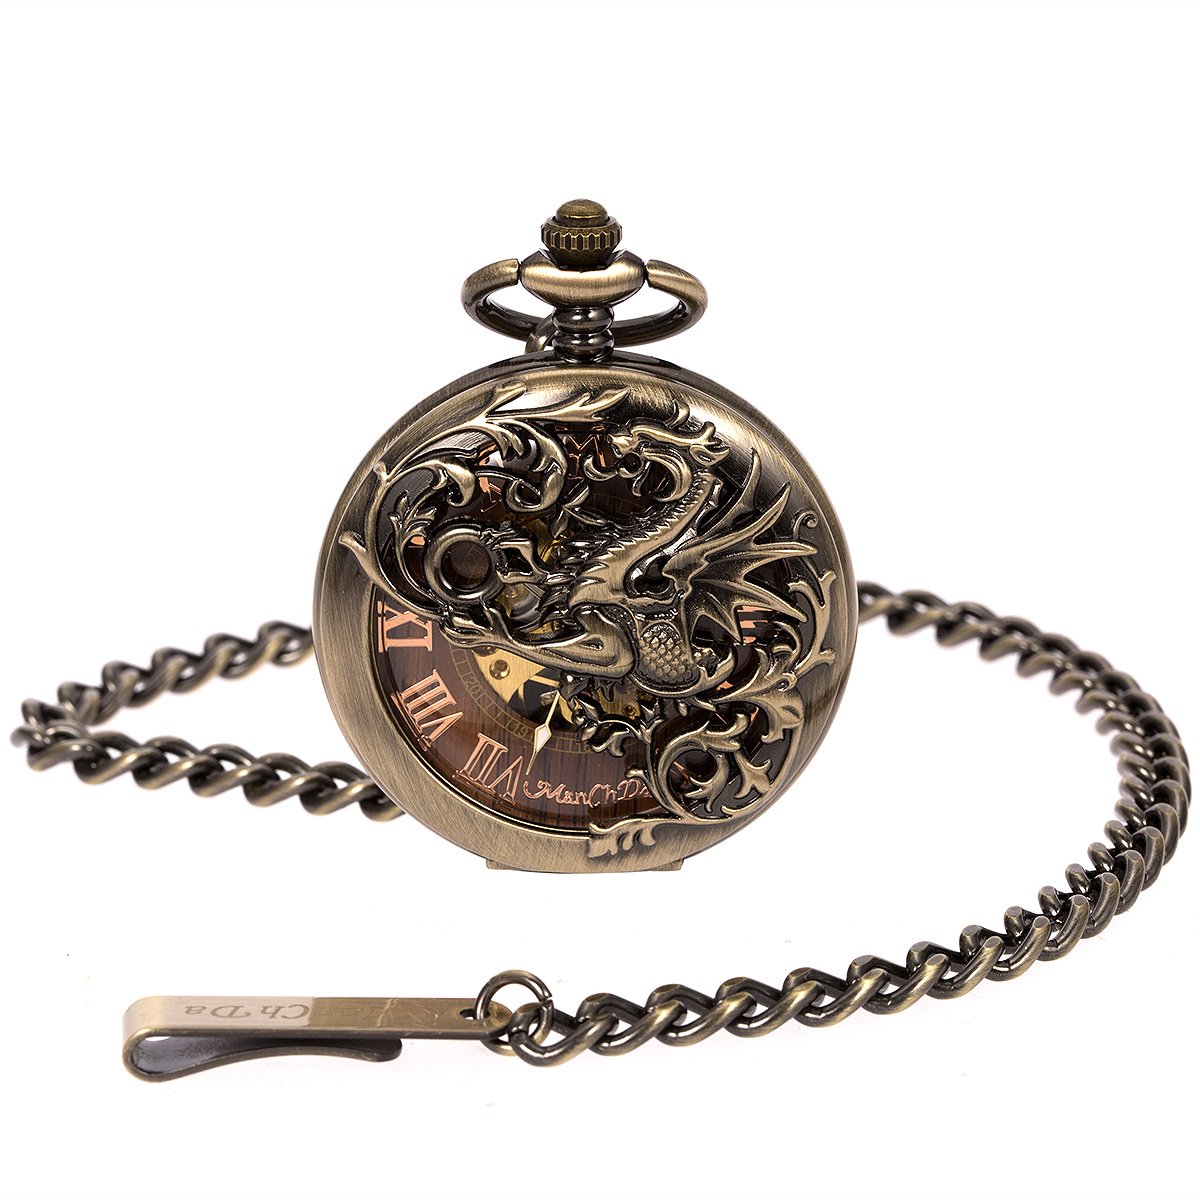 ManChDa Mens Antique Skeleton Mechanical Pocket Watch Dragon Hollow Hunter with Chain and Box